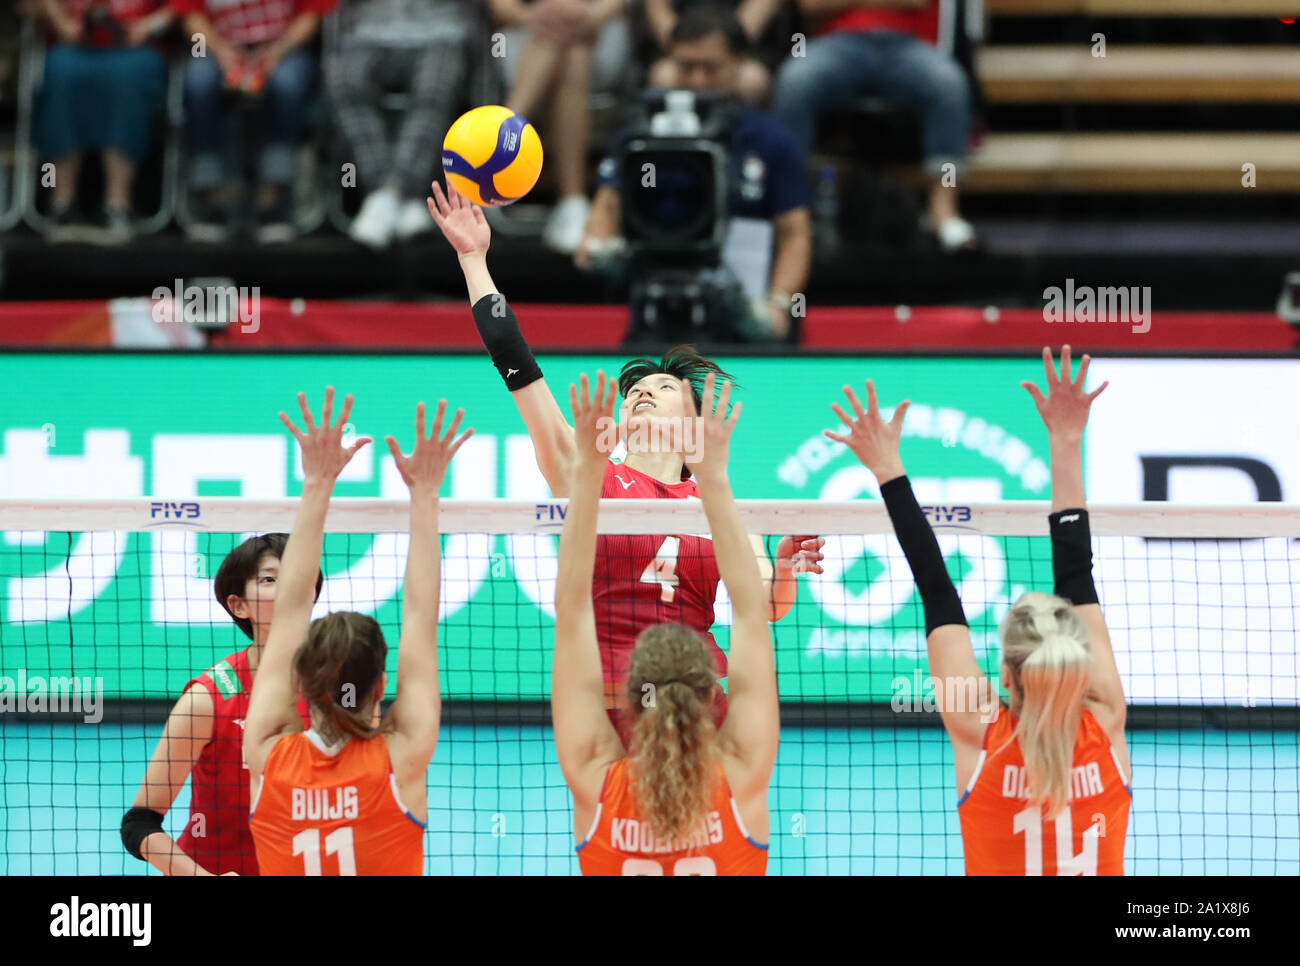 Osaka, Japan. 29th Sep, 2019. Risa Shinnabe (top) of Japan spikes the ball during a round robin match against the Netherlands at the 2019 FIVB Volleyball Women's World Cup in Osaka, Japan, Sept. 29, 2019. Credit: Du Xiaoyi/Xinhua/Alamy Live News Stock Photo